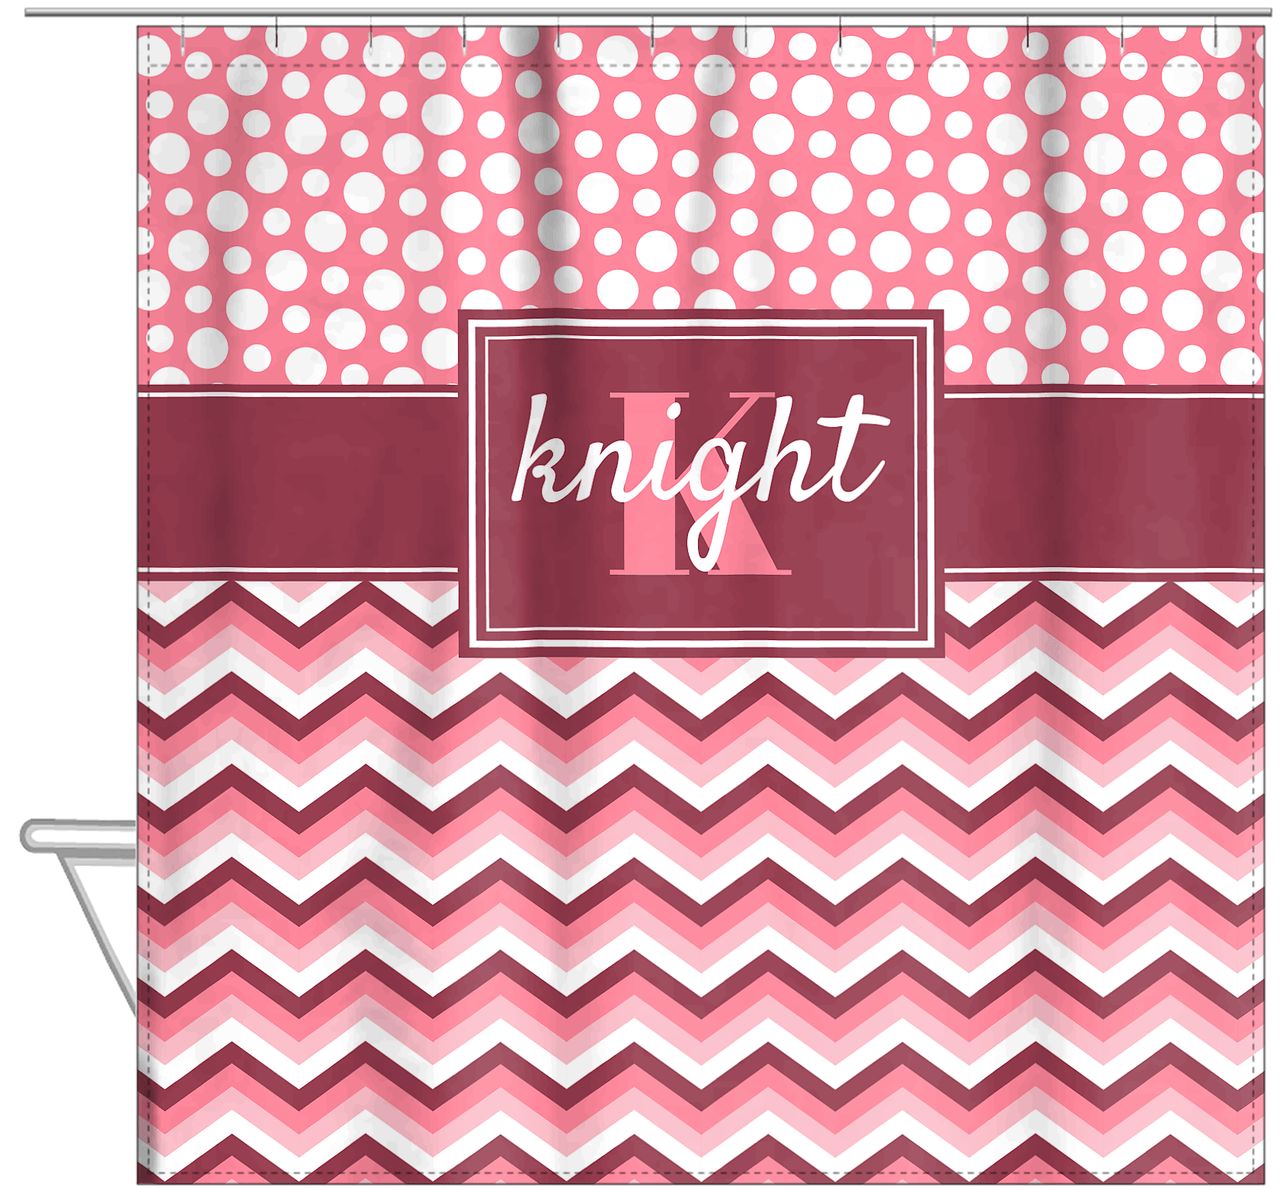 Personalized Polka Dots and Chevron II Shower Curtain - Pink and White - Rectangle Nameplate - Hanging View